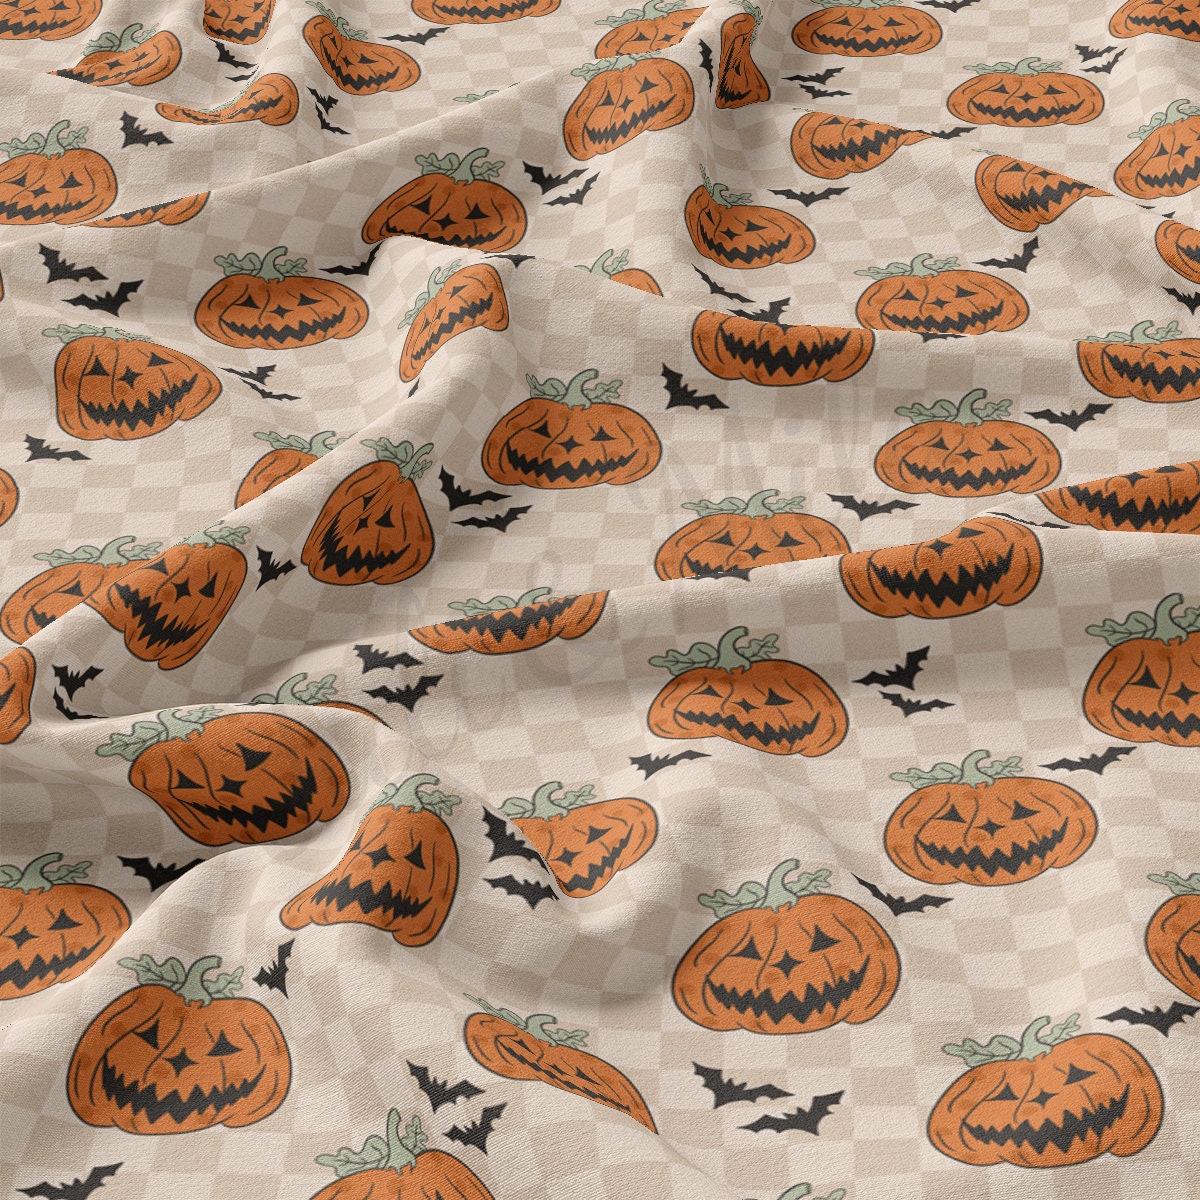 DBP Fabric Double Brushed Polyester Fabric DBP1878 halloween